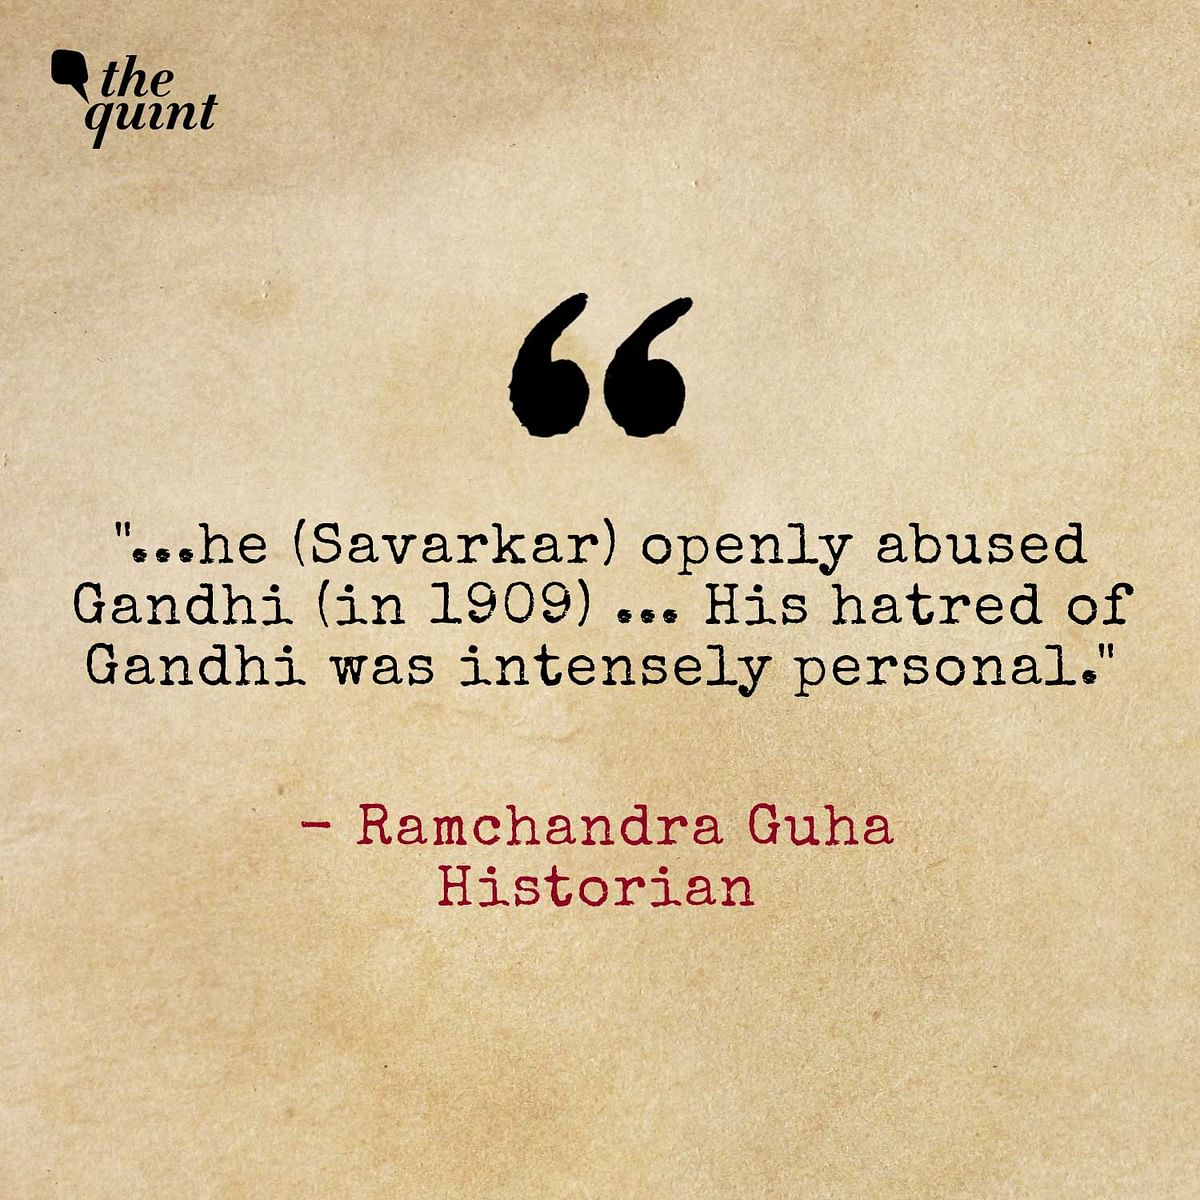 Gandhi was in favour of Savarkar's release from jail. But did he advise Savarkar to write 'mercy petitions'?